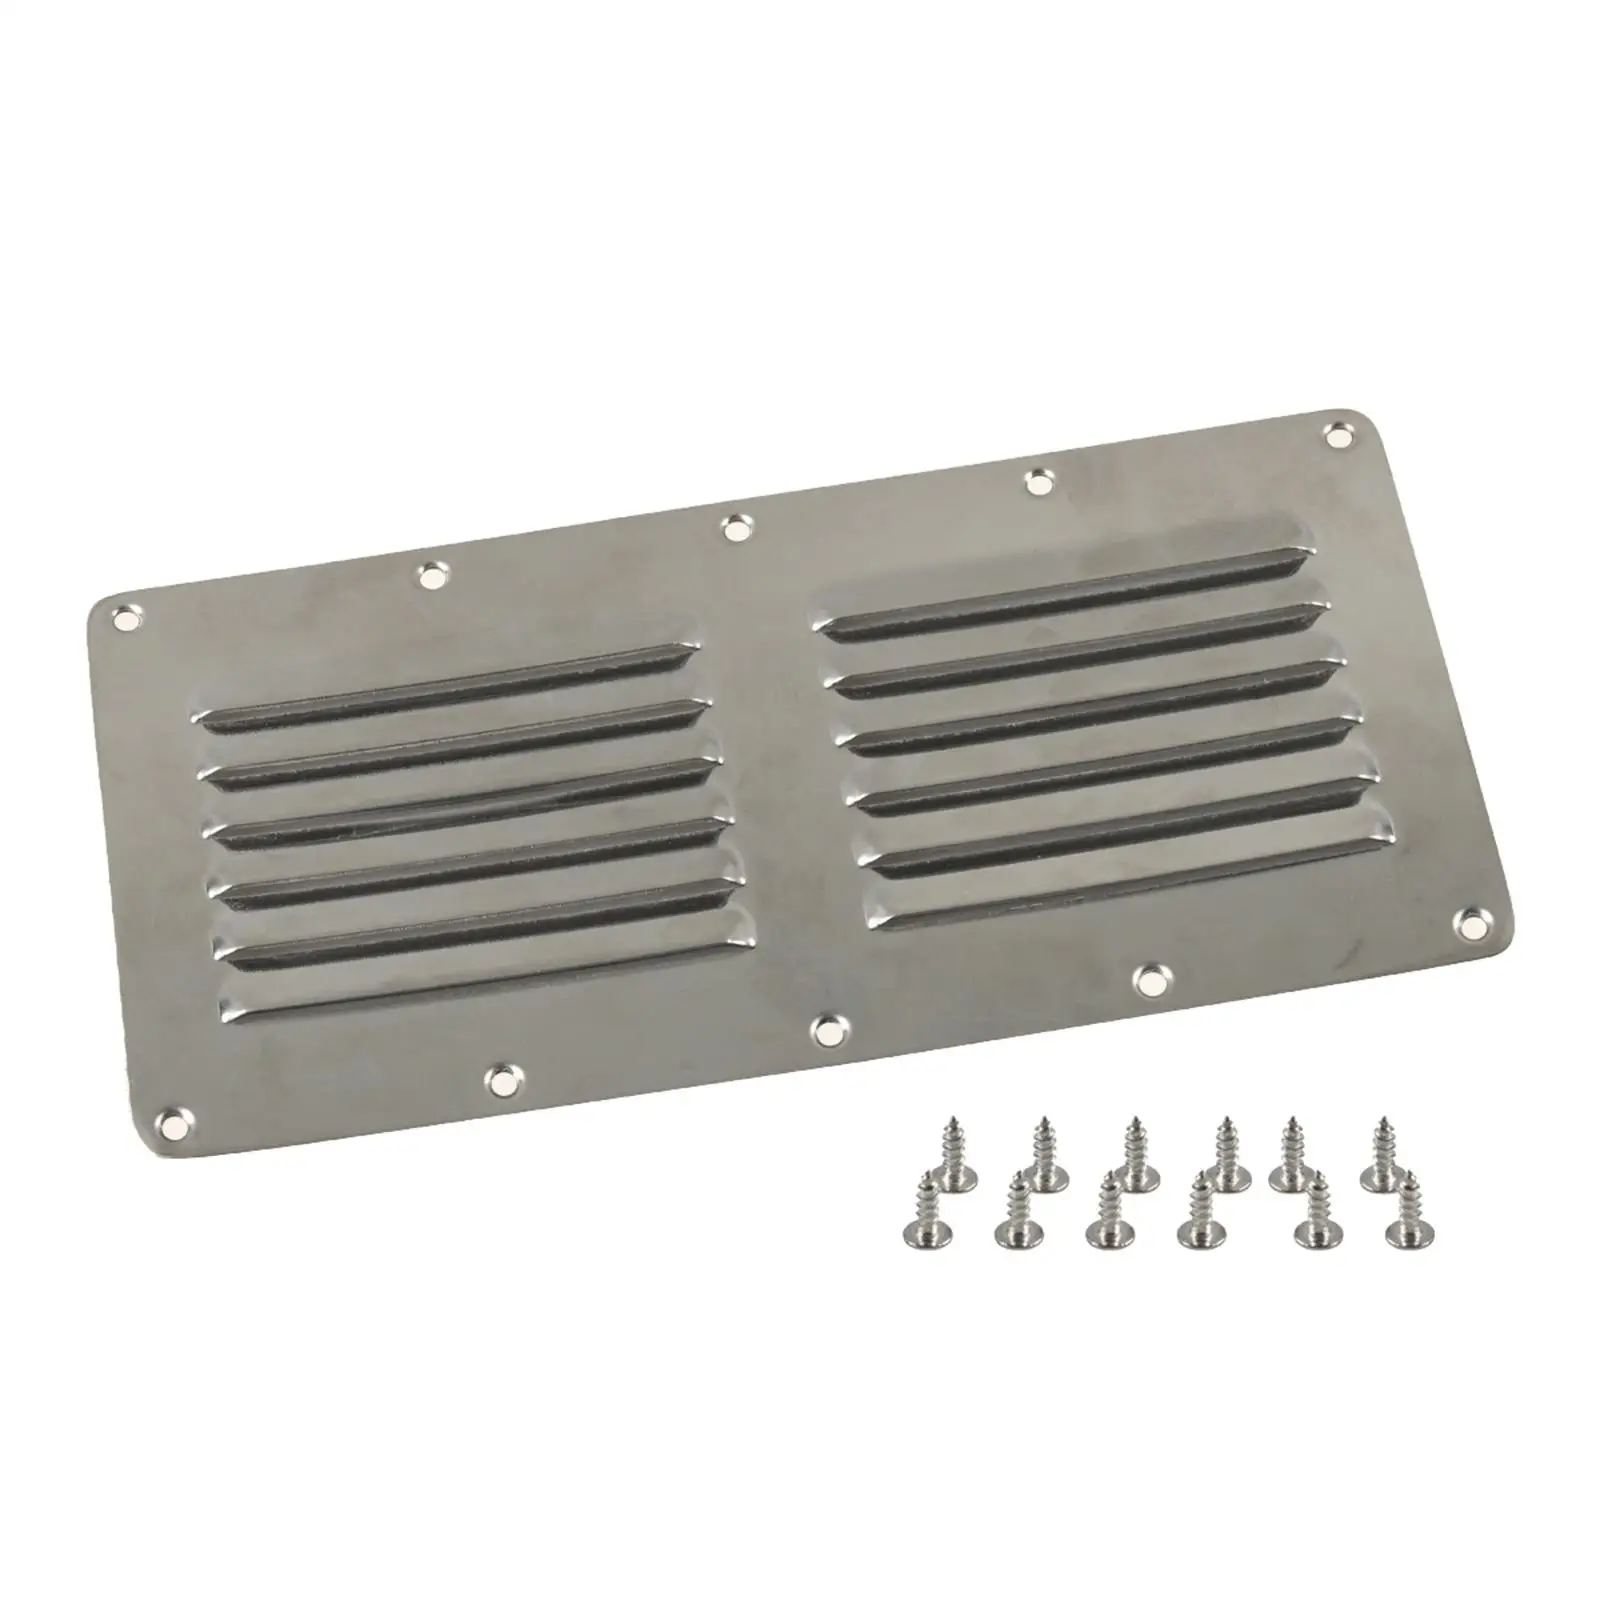 Boat Louver Vent Durable Fittings Louvered Ventilator Stable Performance Stainless Steel for Yacht Marine Air Grill Caravan